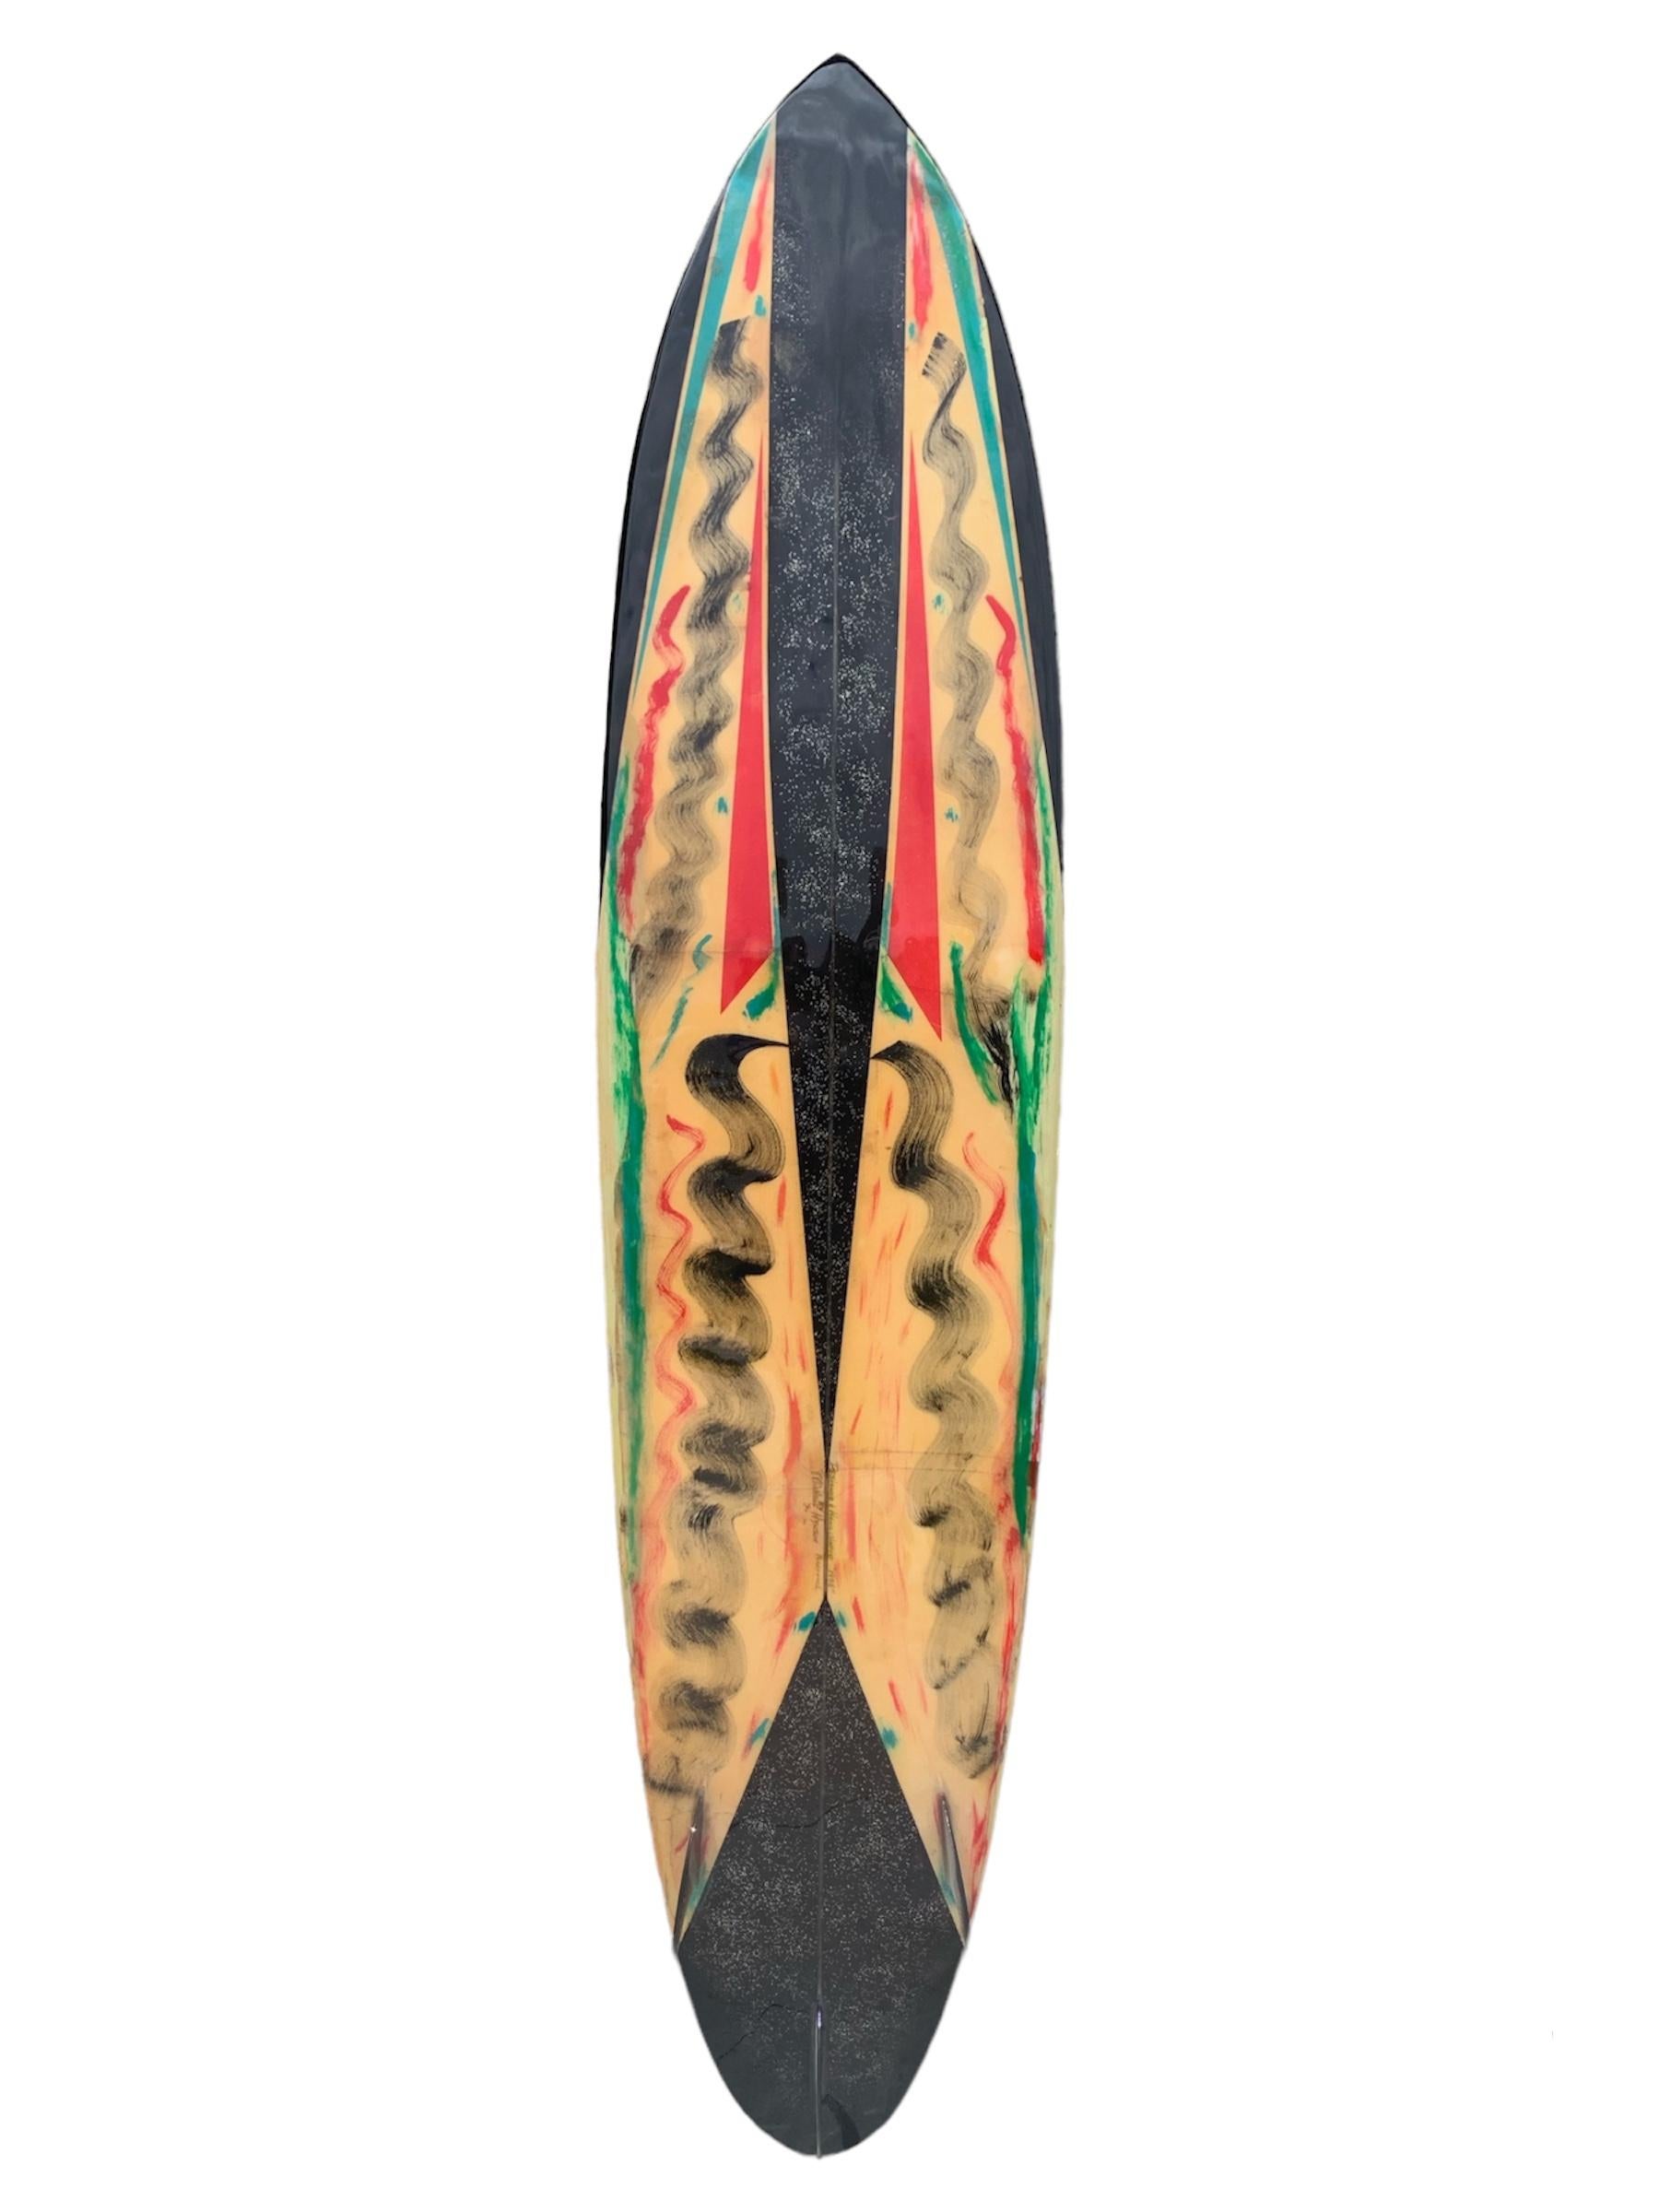 Mike Hynson’s personal surfboard. Shaped under the Yater Surfboards label in 1986-87 by Mike Hynson . Features airbrush design with Endless Summer inspired ‘Mike Hynson Designs’ logo. Partially restored condition. Hynson was the co-star of classic